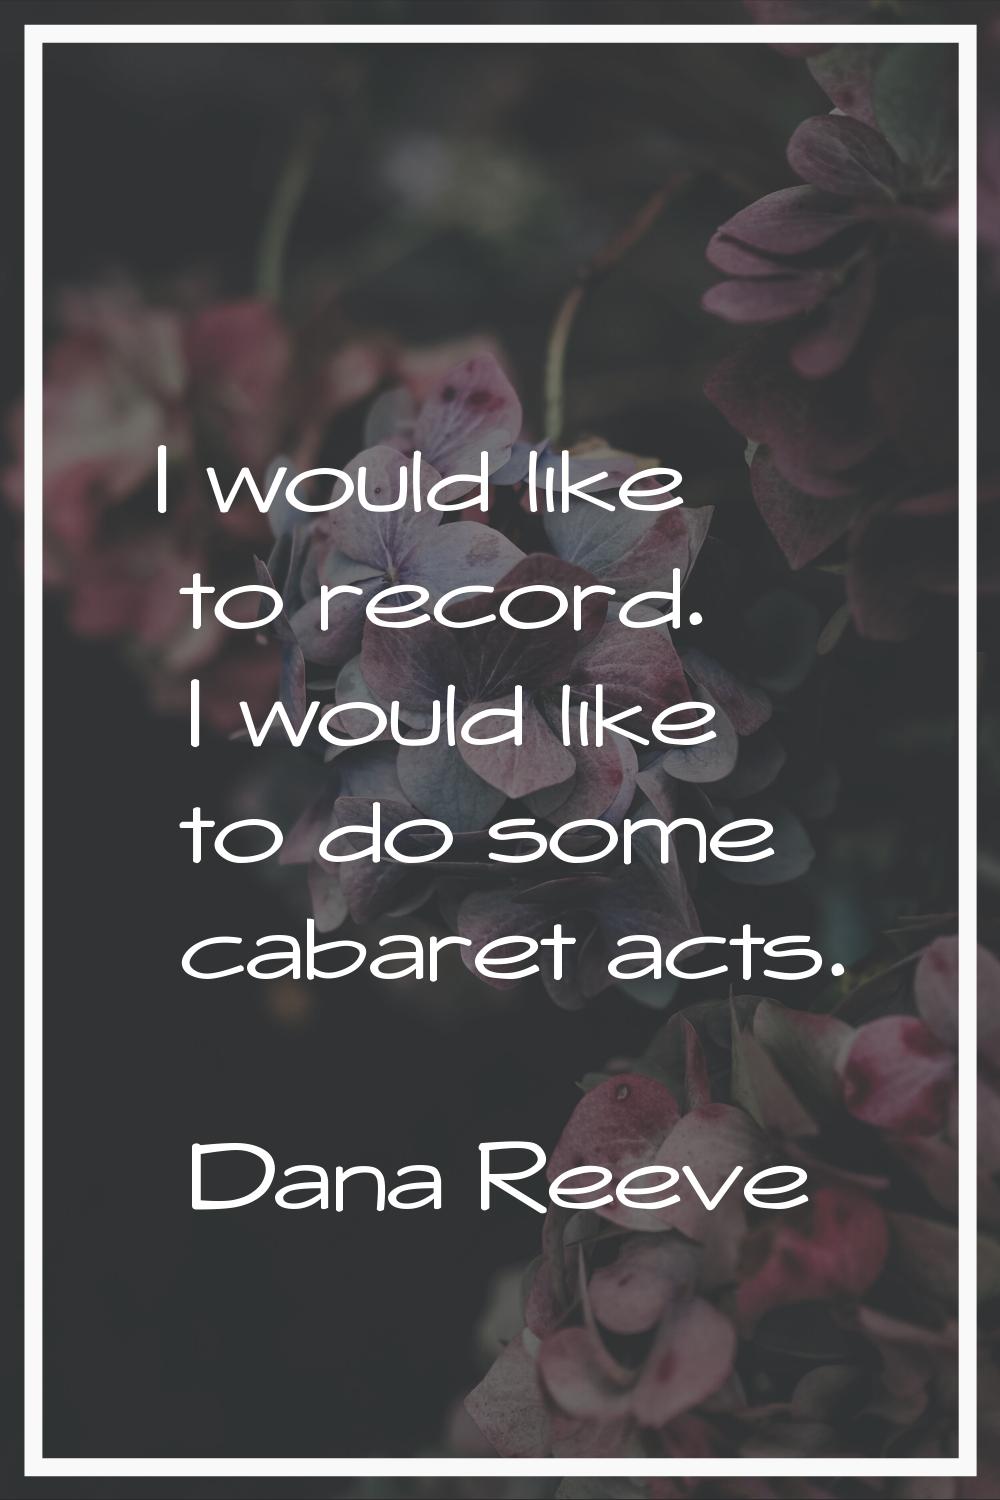 I would like to record. I would like to do some cabaret acts.